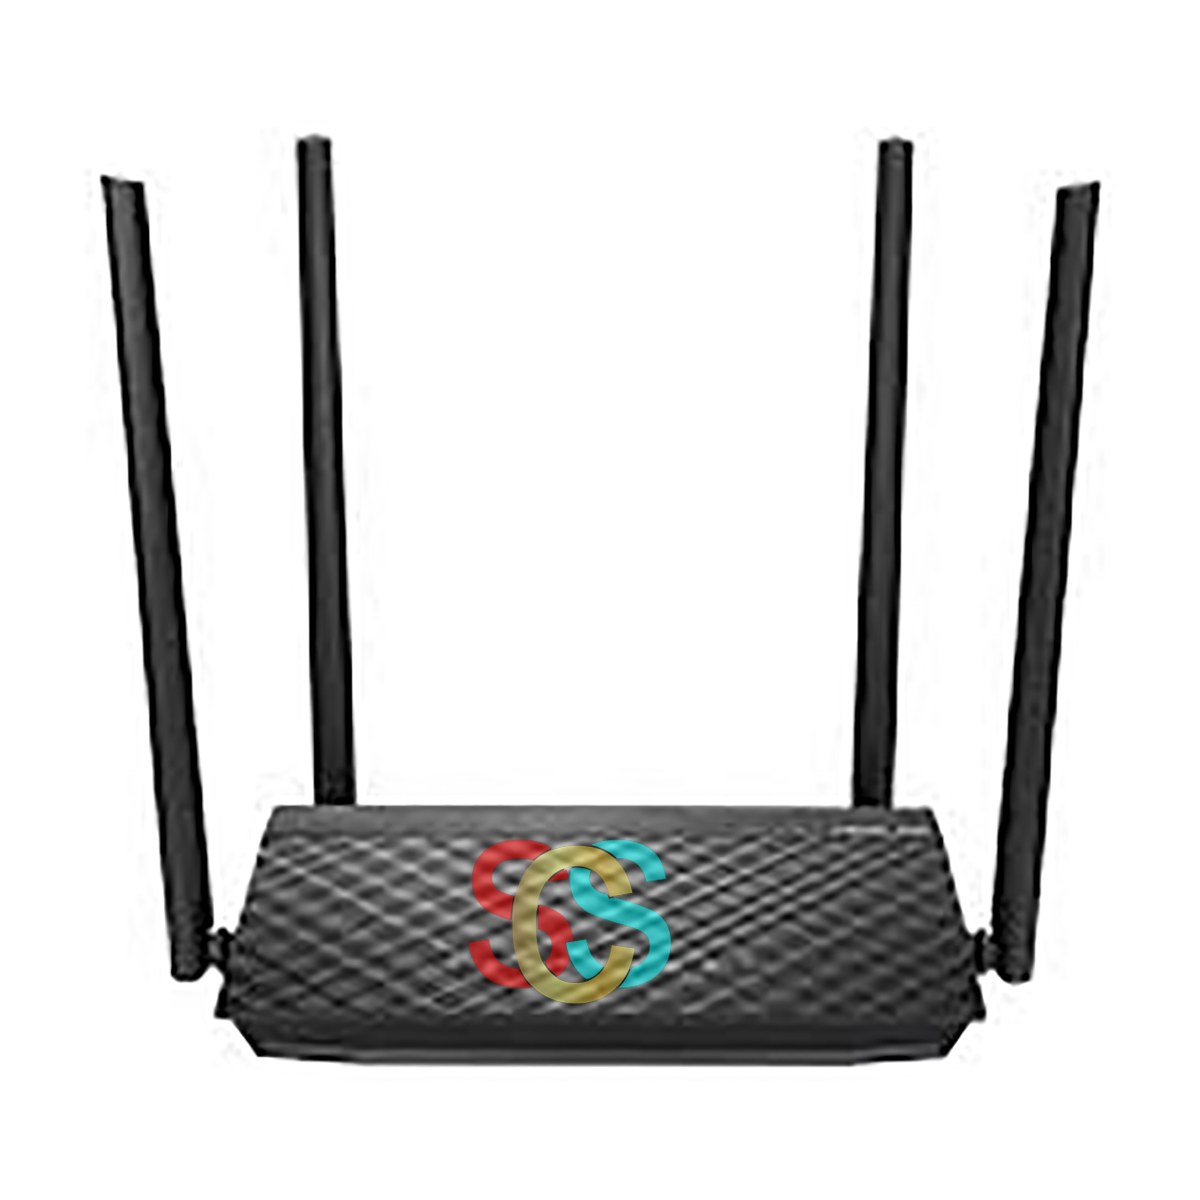 Asus RT-AC1500UHP AC1500 Mbps Gigabit Dual-Band Wi-Fi Router